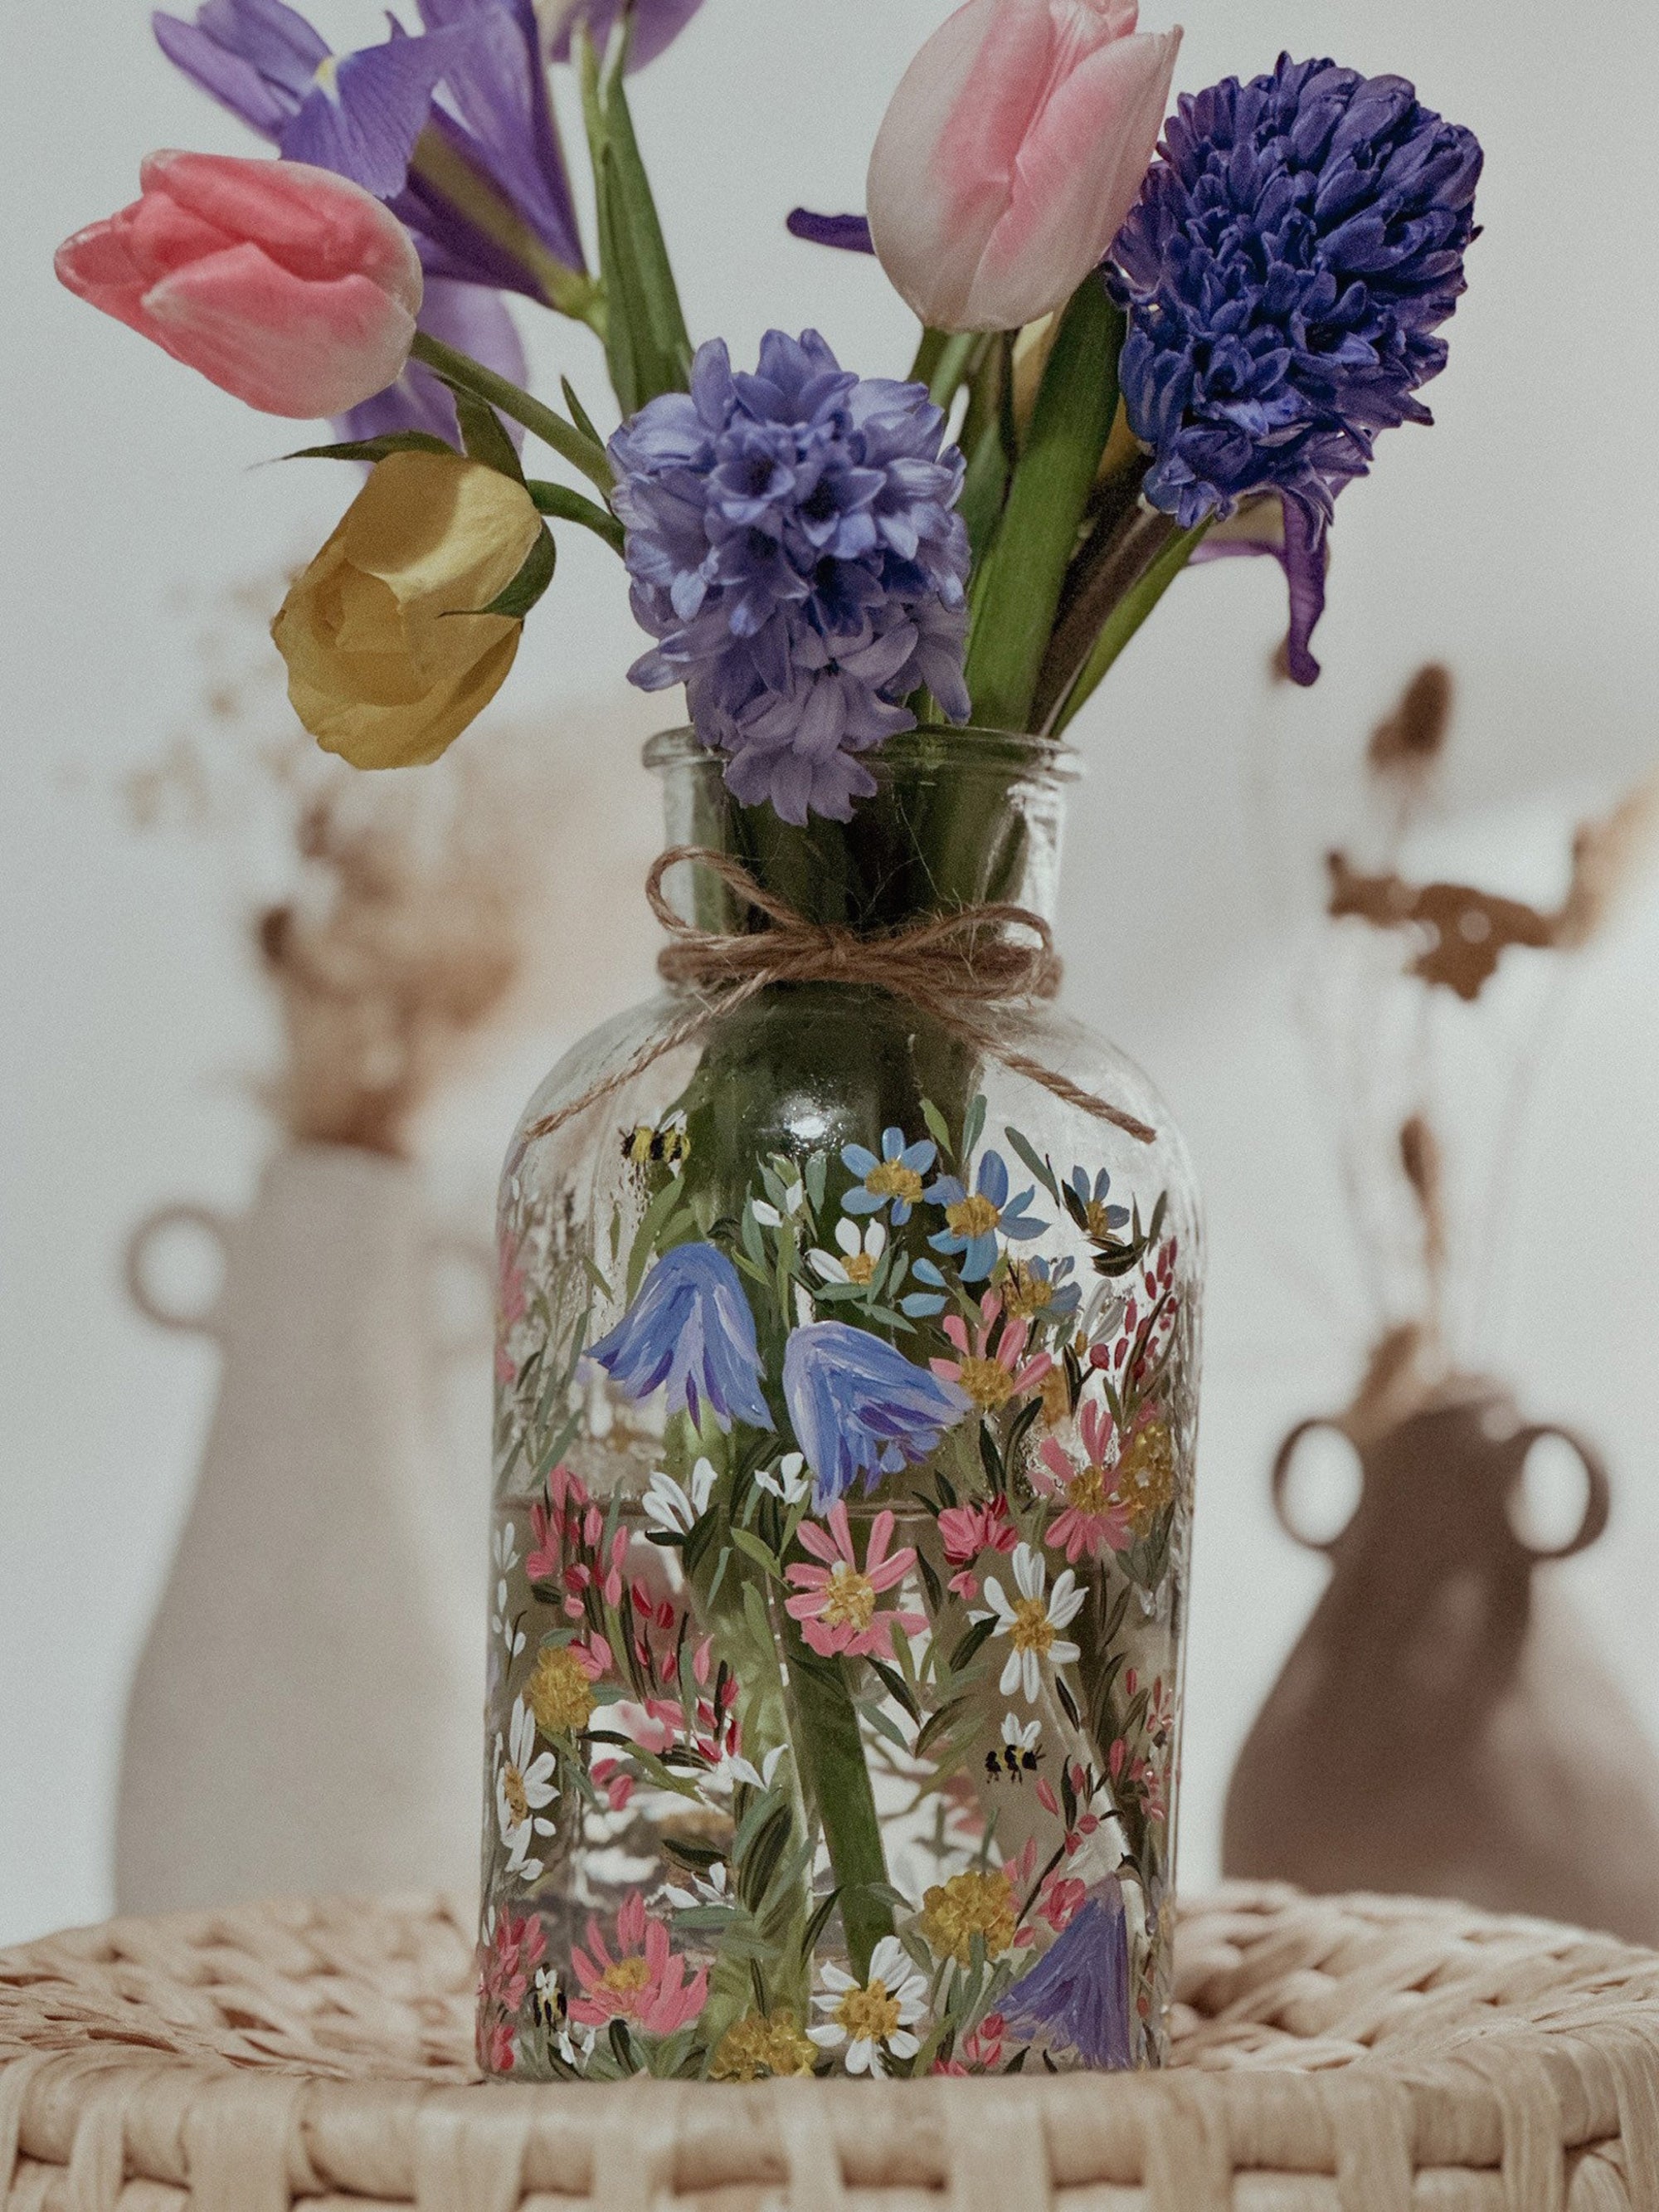 Bloom & Wild and Sculpd's Mother's Day pottery kits with dried flowers